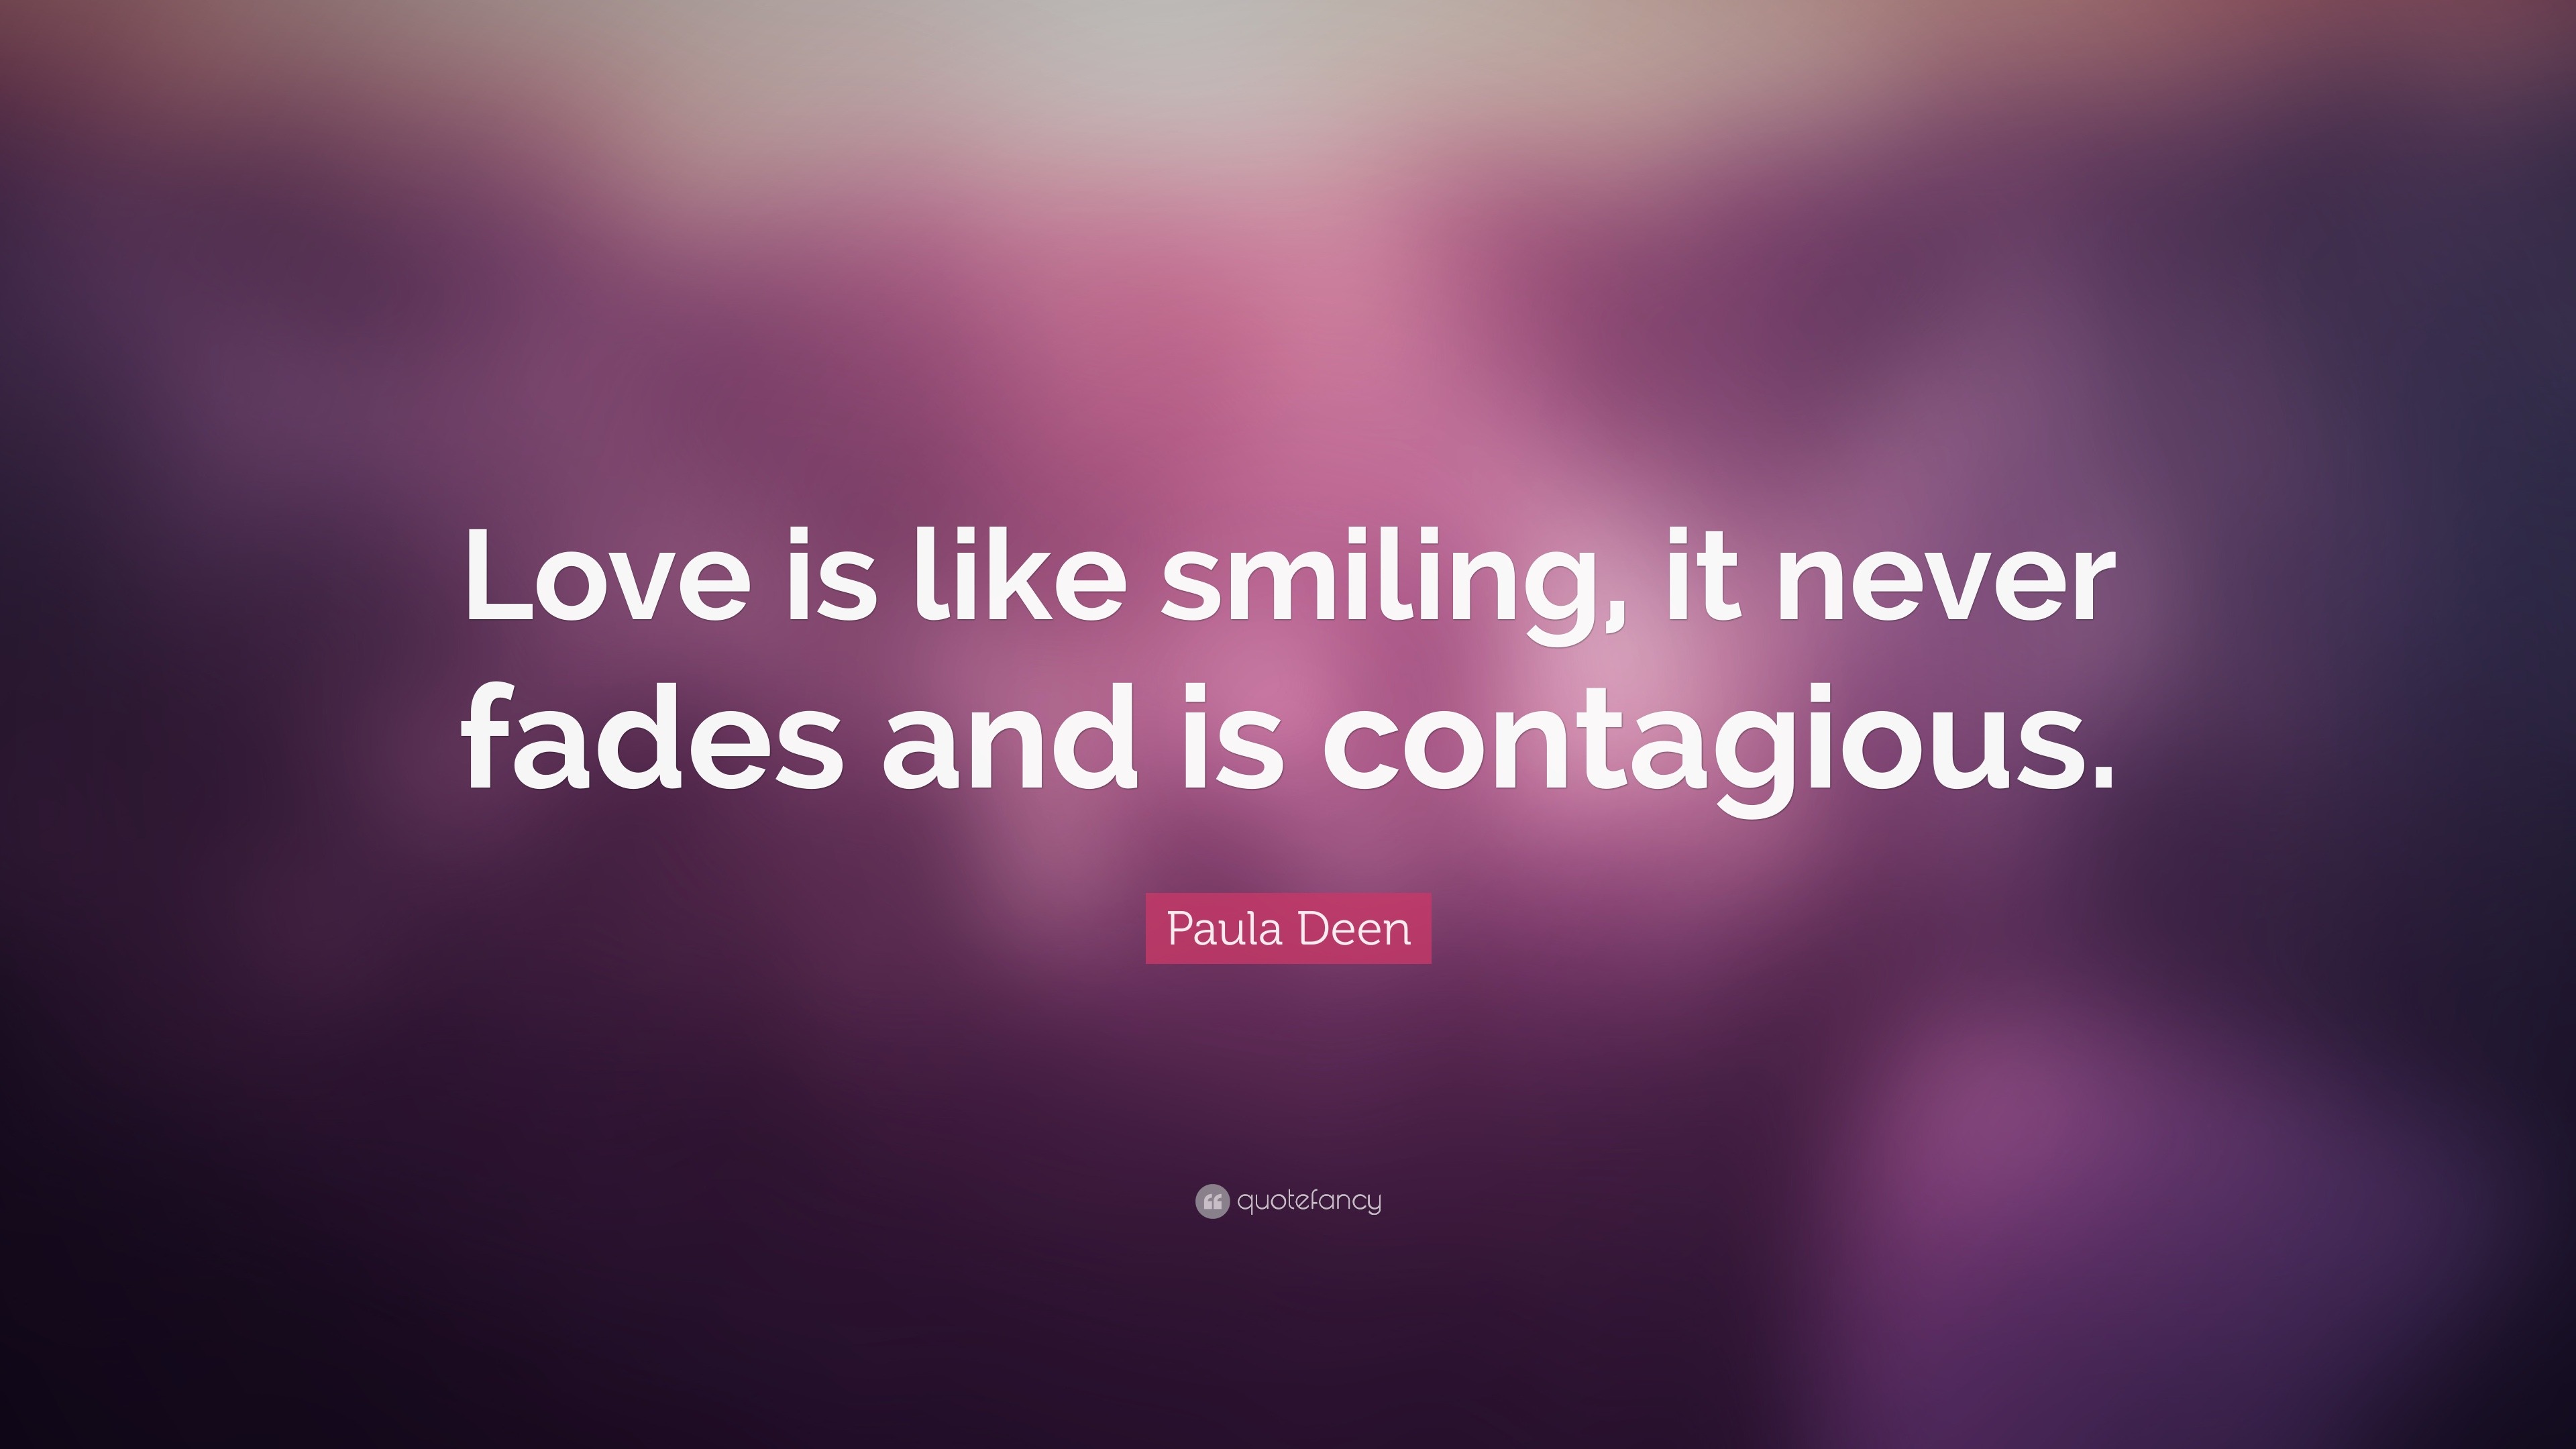 Paula Deen Quote: “Love is like smiling, it never fades and is contagious.”